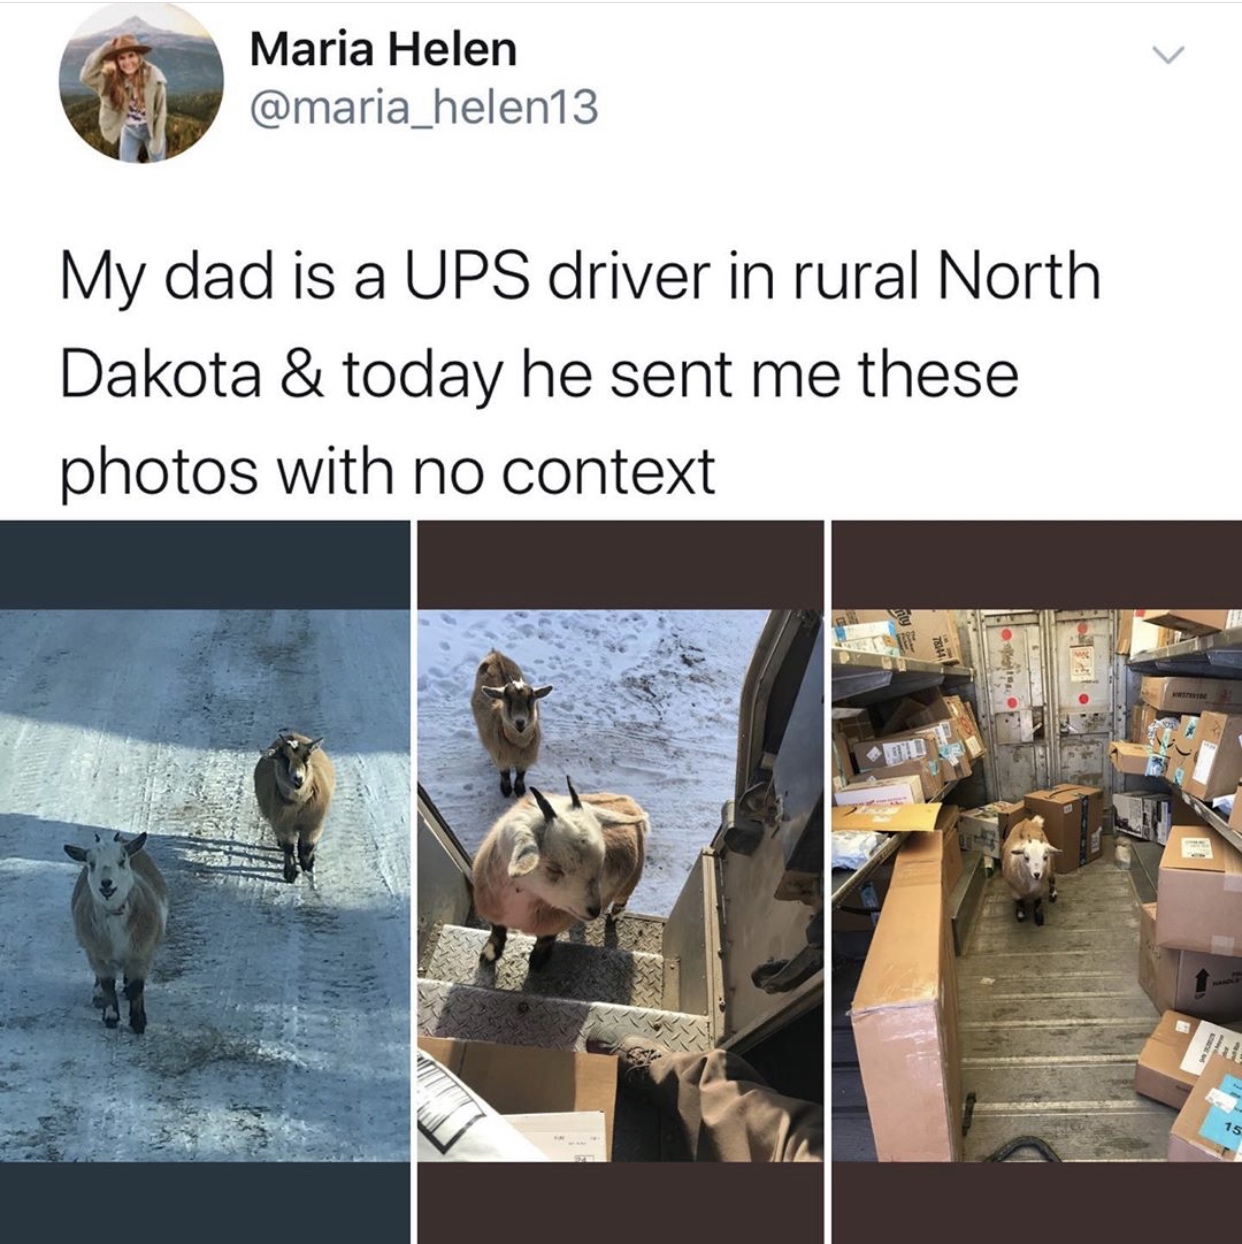 pet - Maria Helen My dad is a Ups driver in rural North Dakota & today he sent me these photos with no context